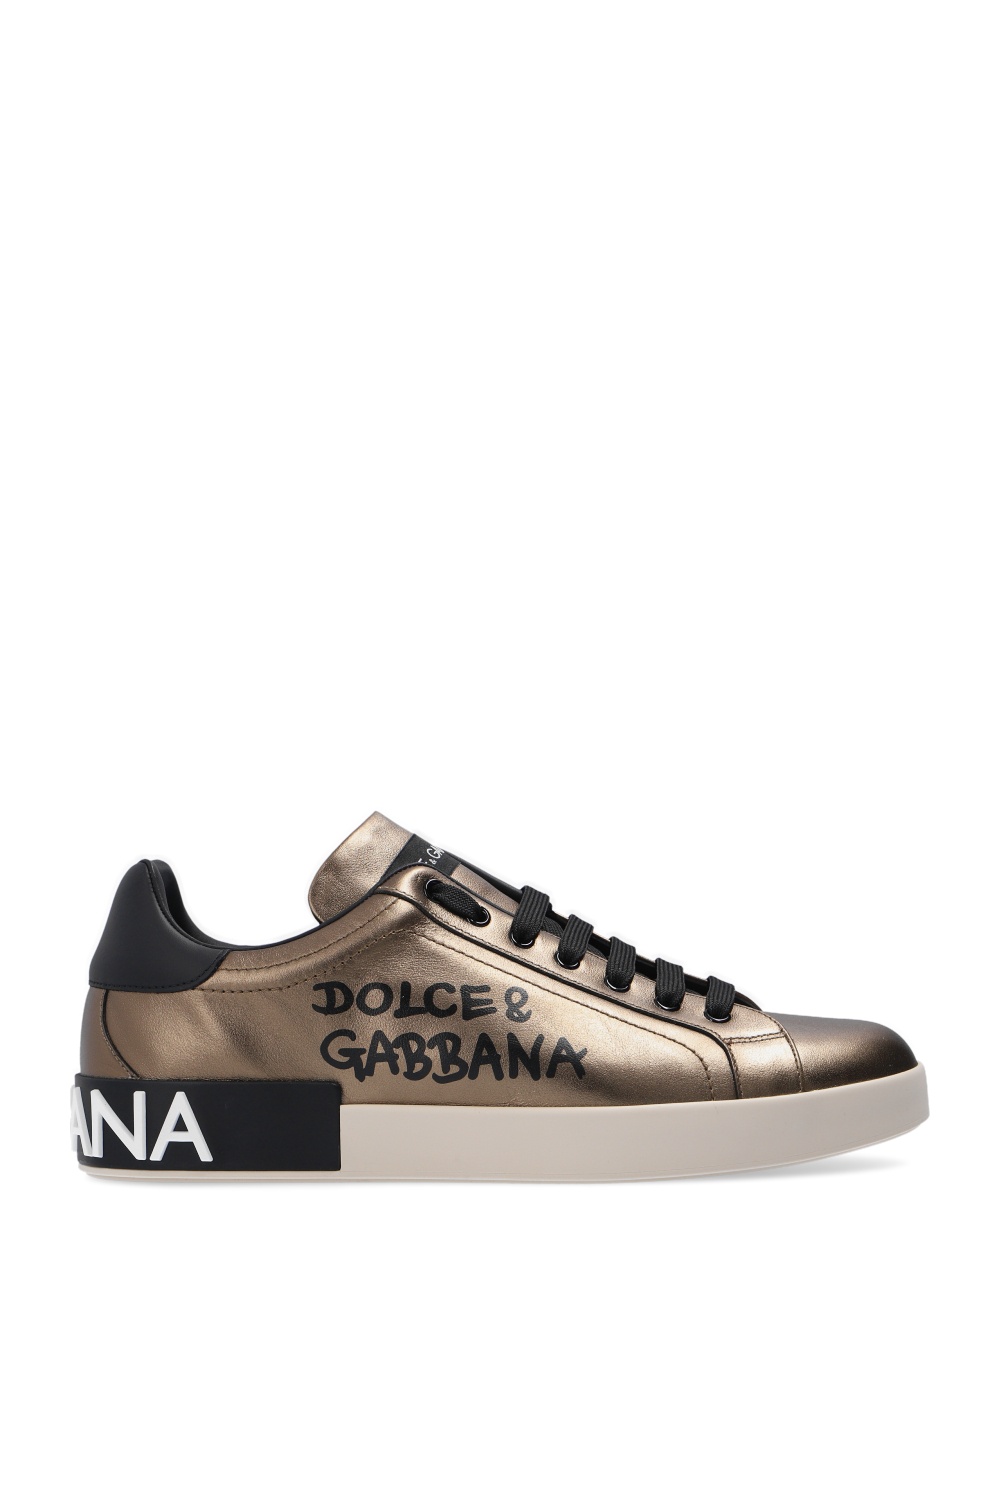 dolce and gabbana shadow shoes